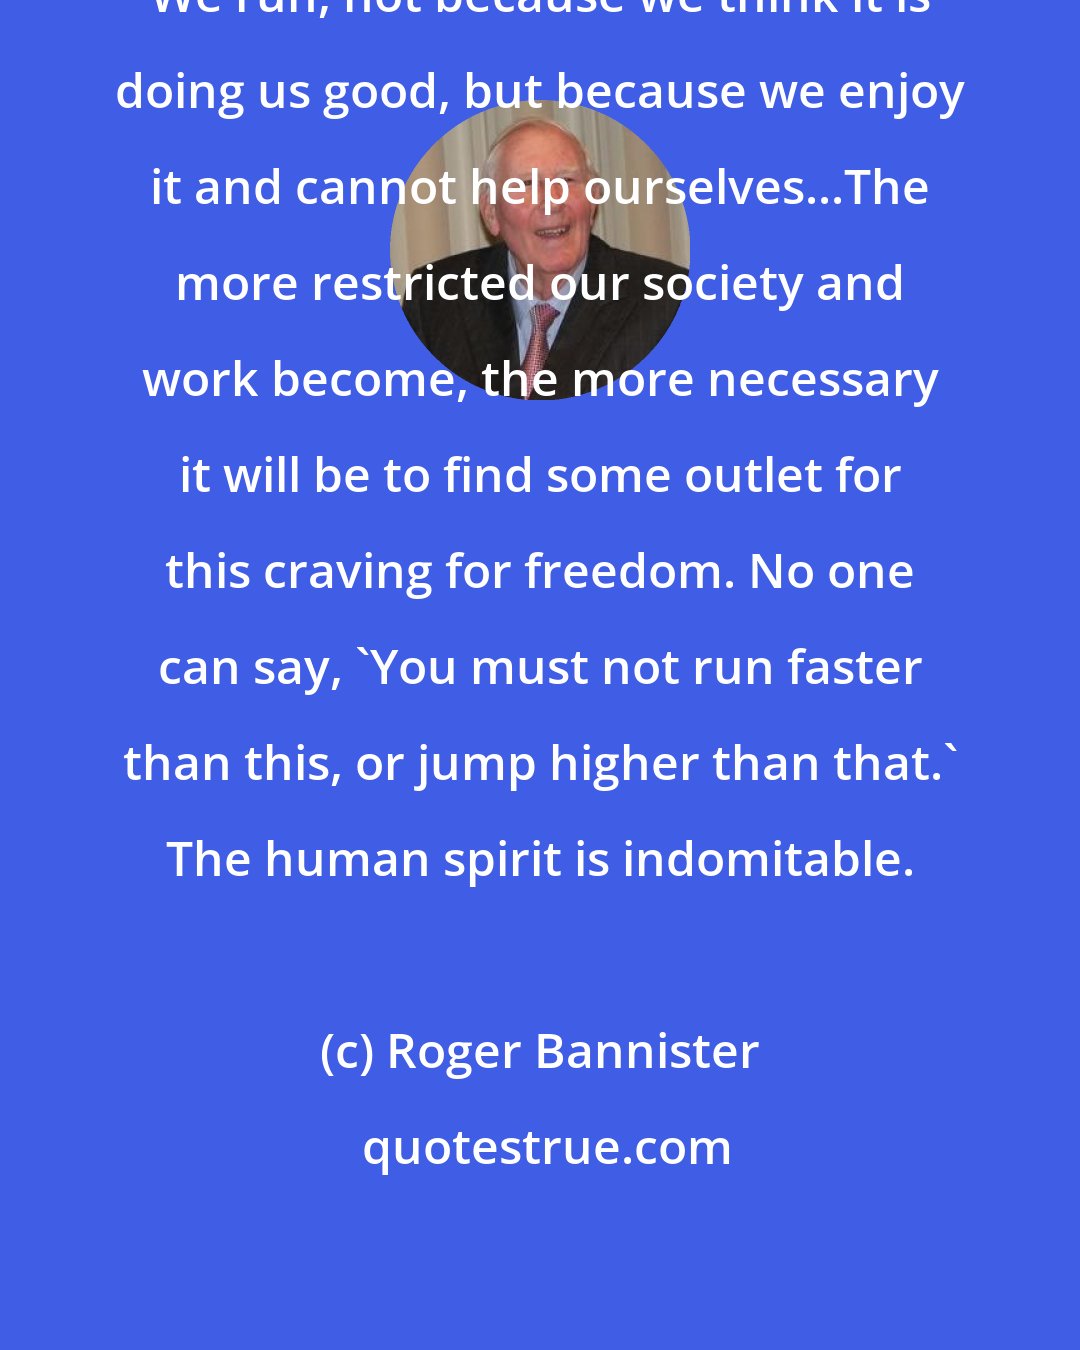 Roger Bannister: We run, not because we think it is doing us good, but because we enjoy it and cannot help ourselves...The more restricted our society and work become, the more necessary it will be to find some outlet for this craving for freedom. No one can say, 'You must not run faster than this, or jump higher than that.' The human spirit is indomitable.